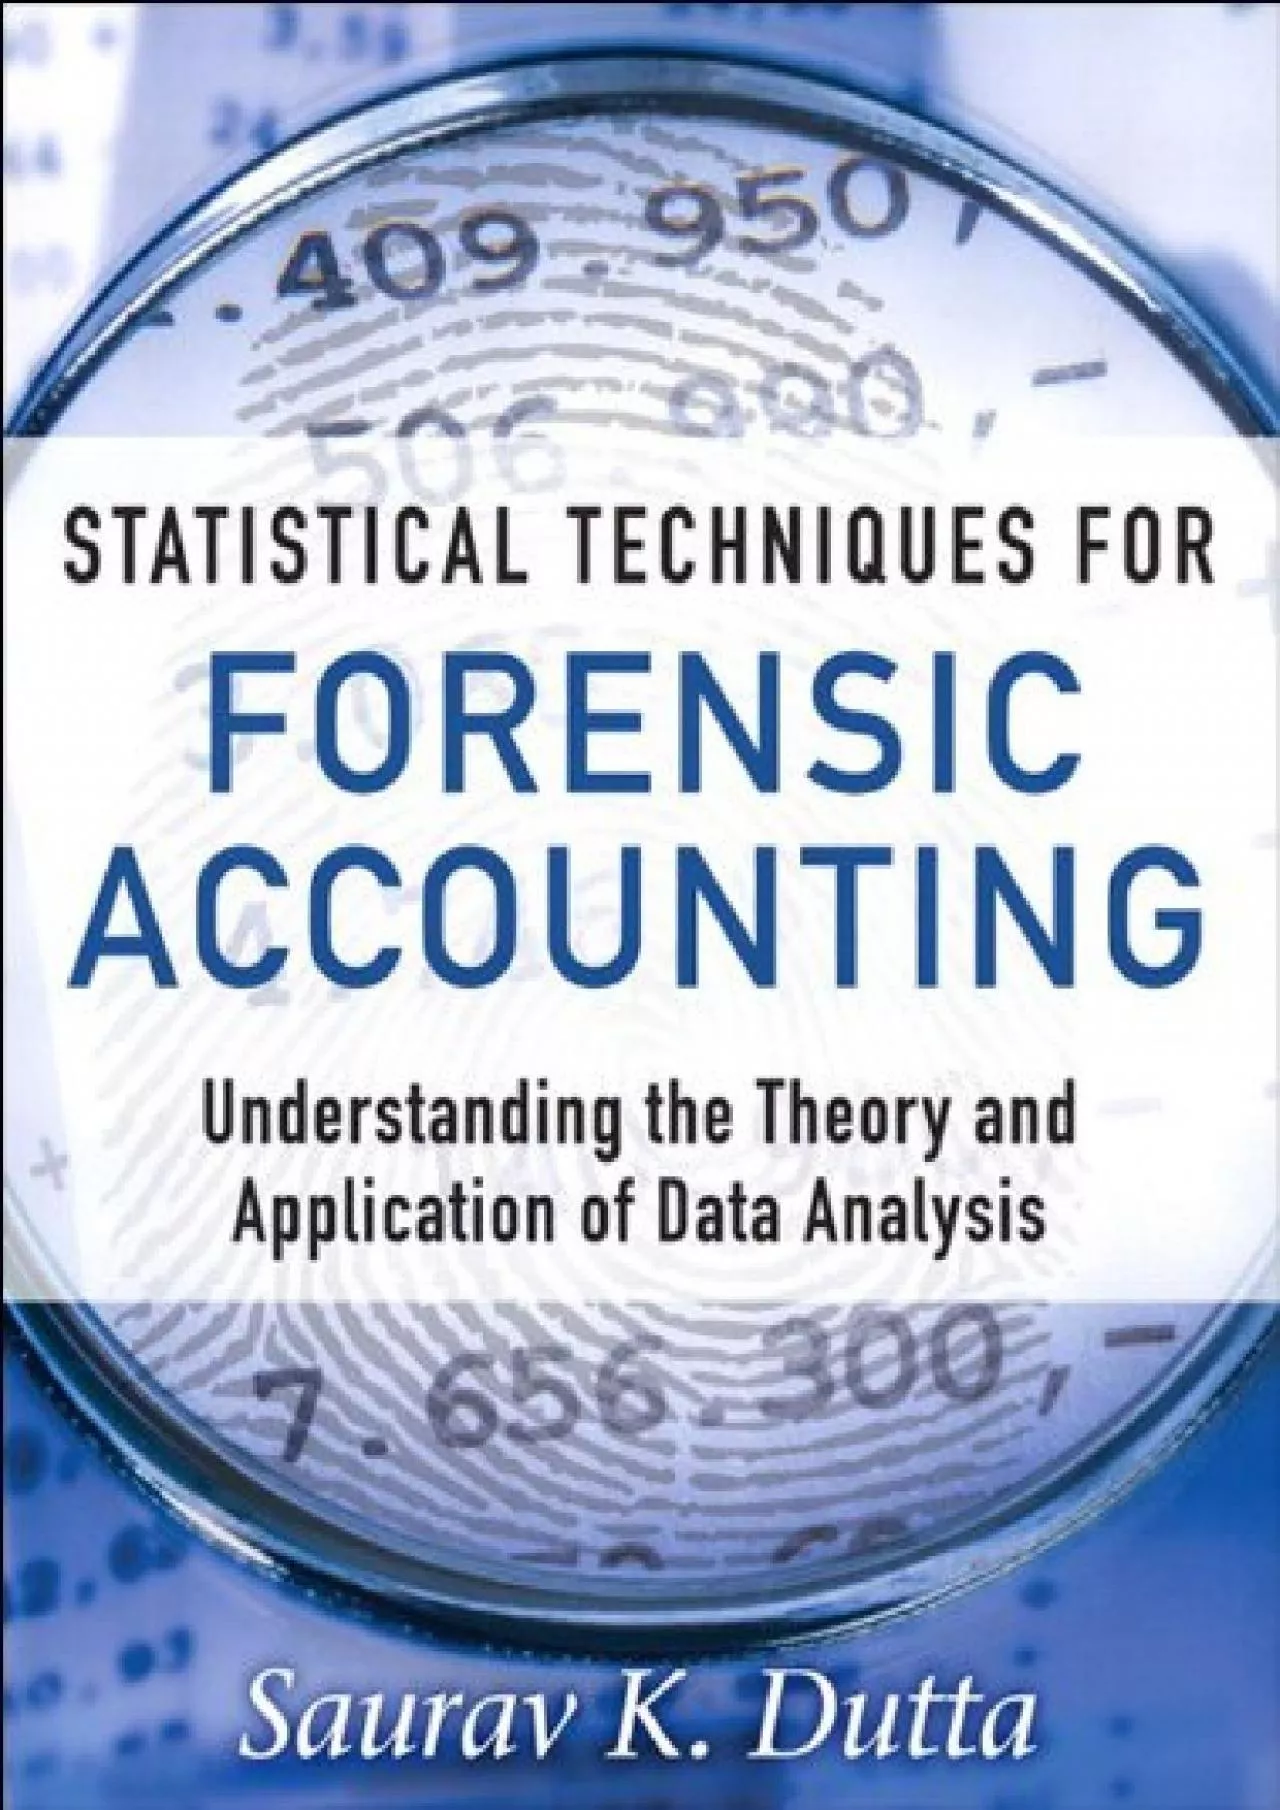 (BOOK)-Statistical Techniques for Forensic Accounting: Understanding the Theory and Application